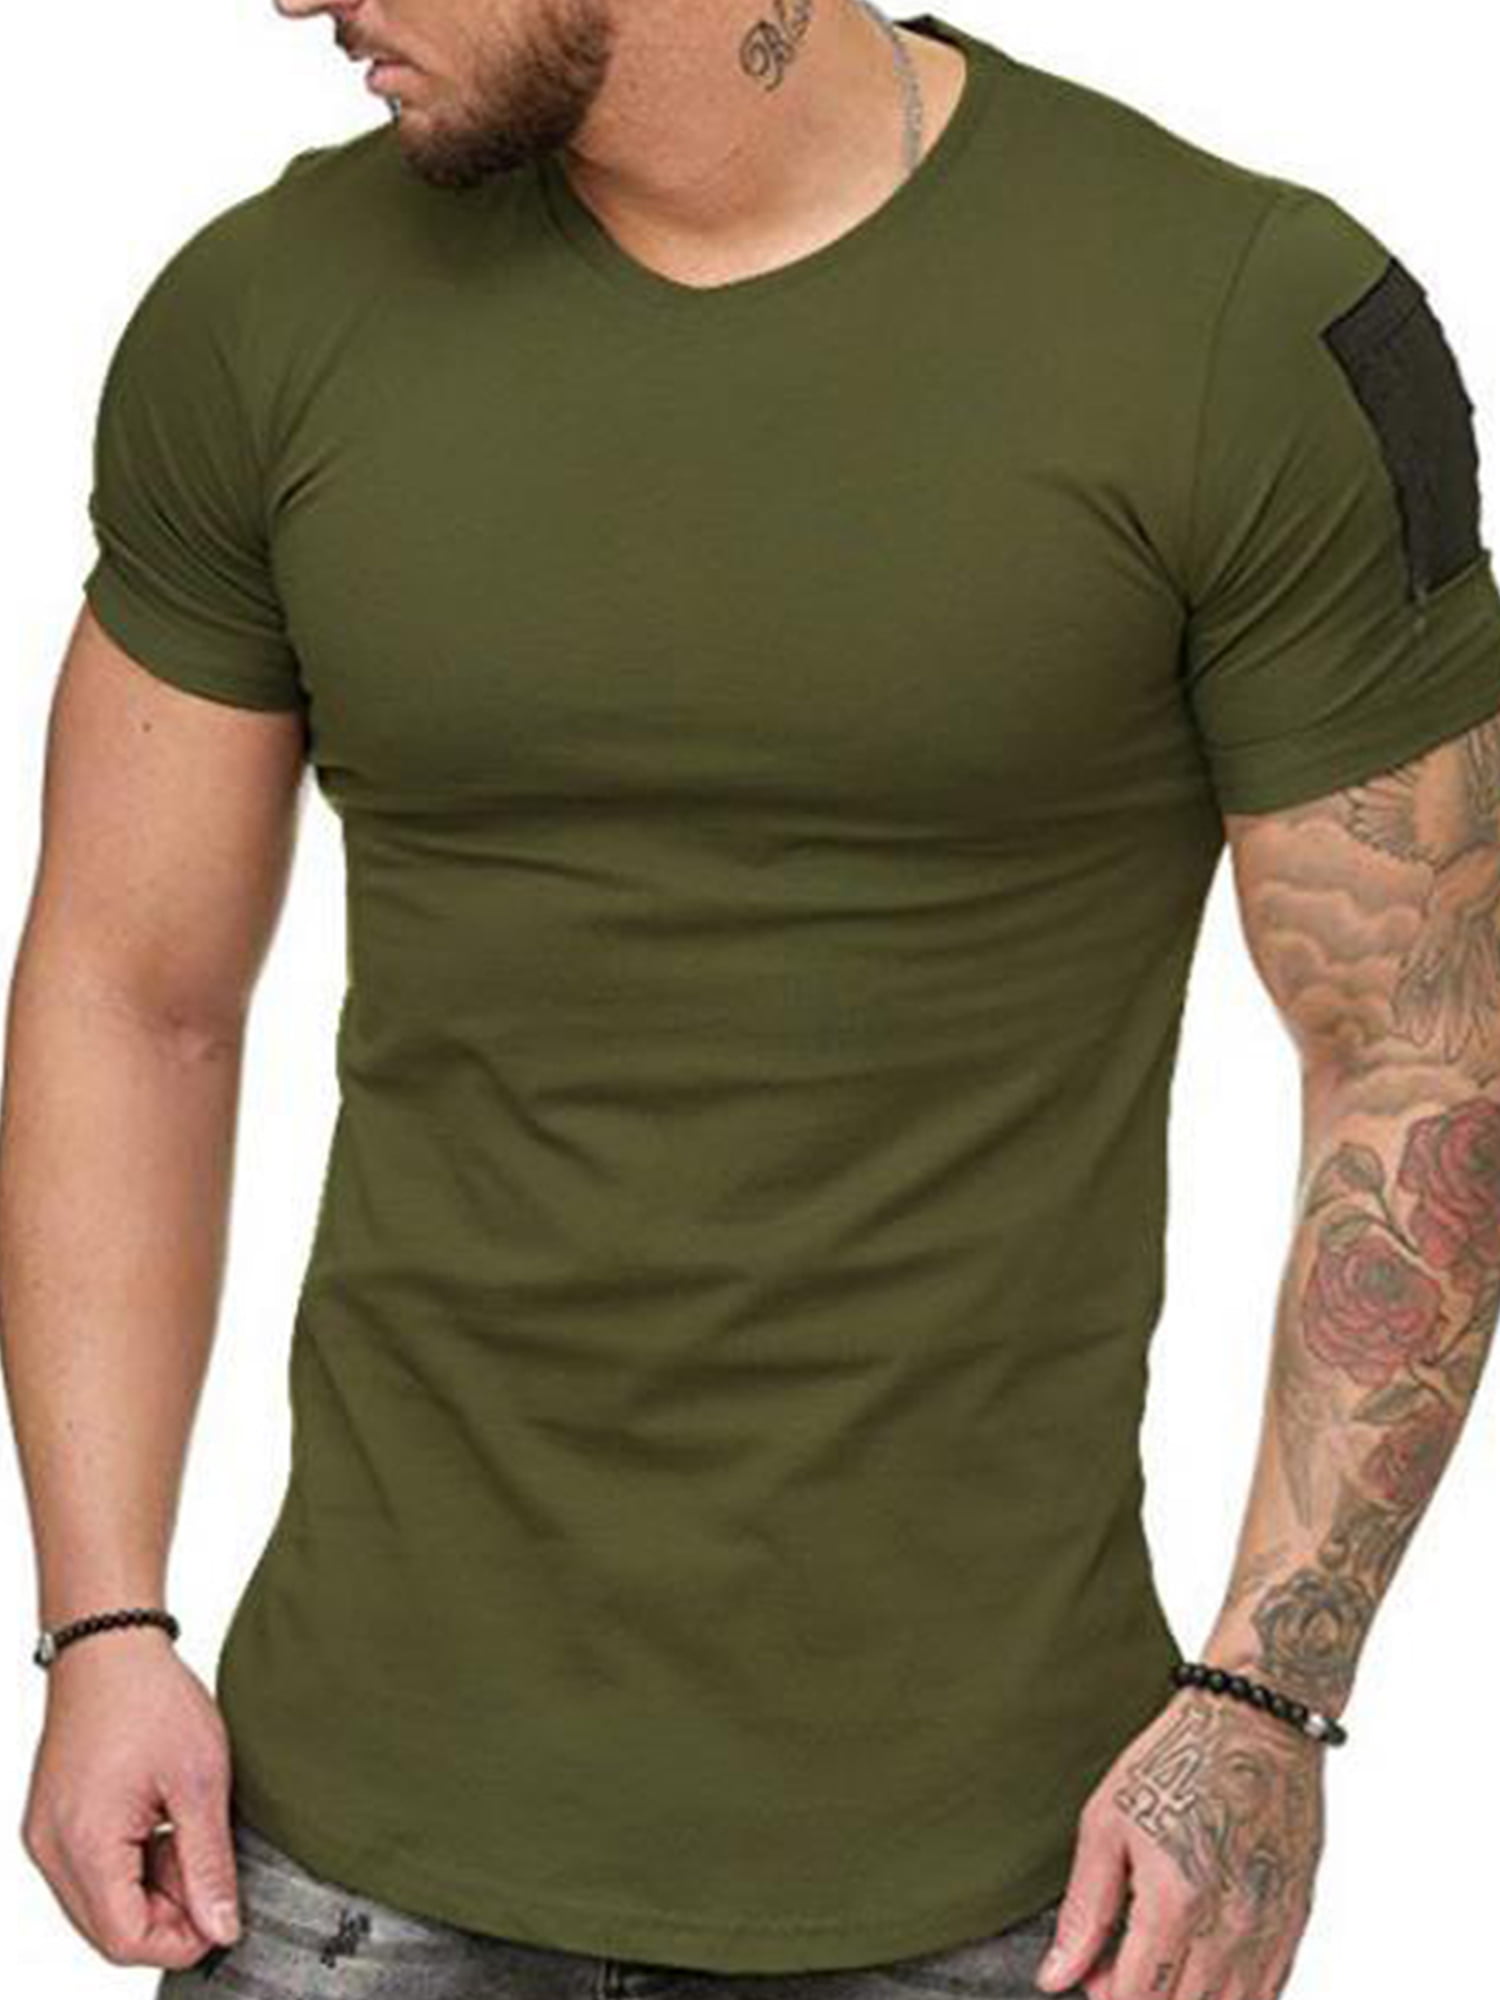 Lallc - Mens Slim Fit Short Sleeve T-Shirt Muscle Casual Blouse Top